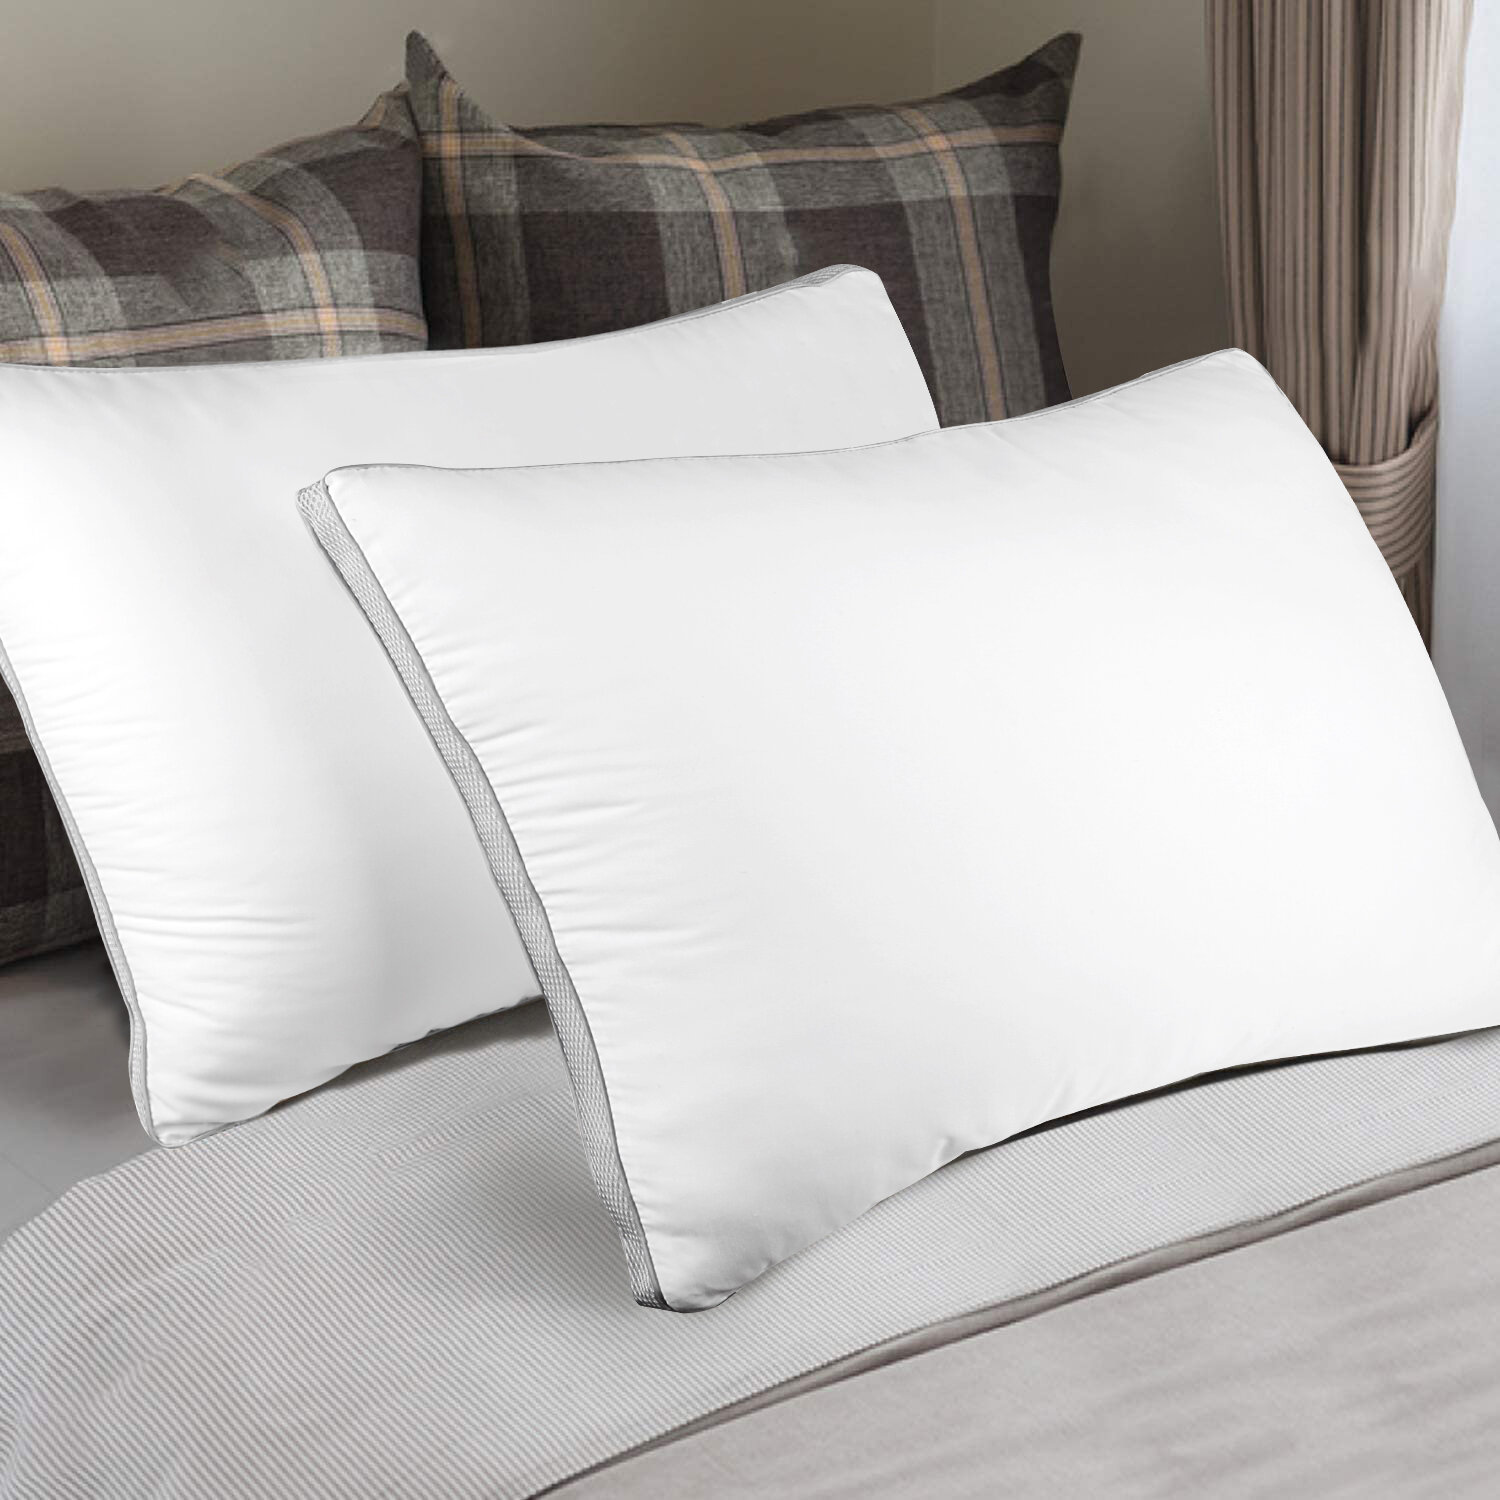 Pillows for Sleeping 2 Pack Hotel Quality Bed Pillow King Size Down Alternative 